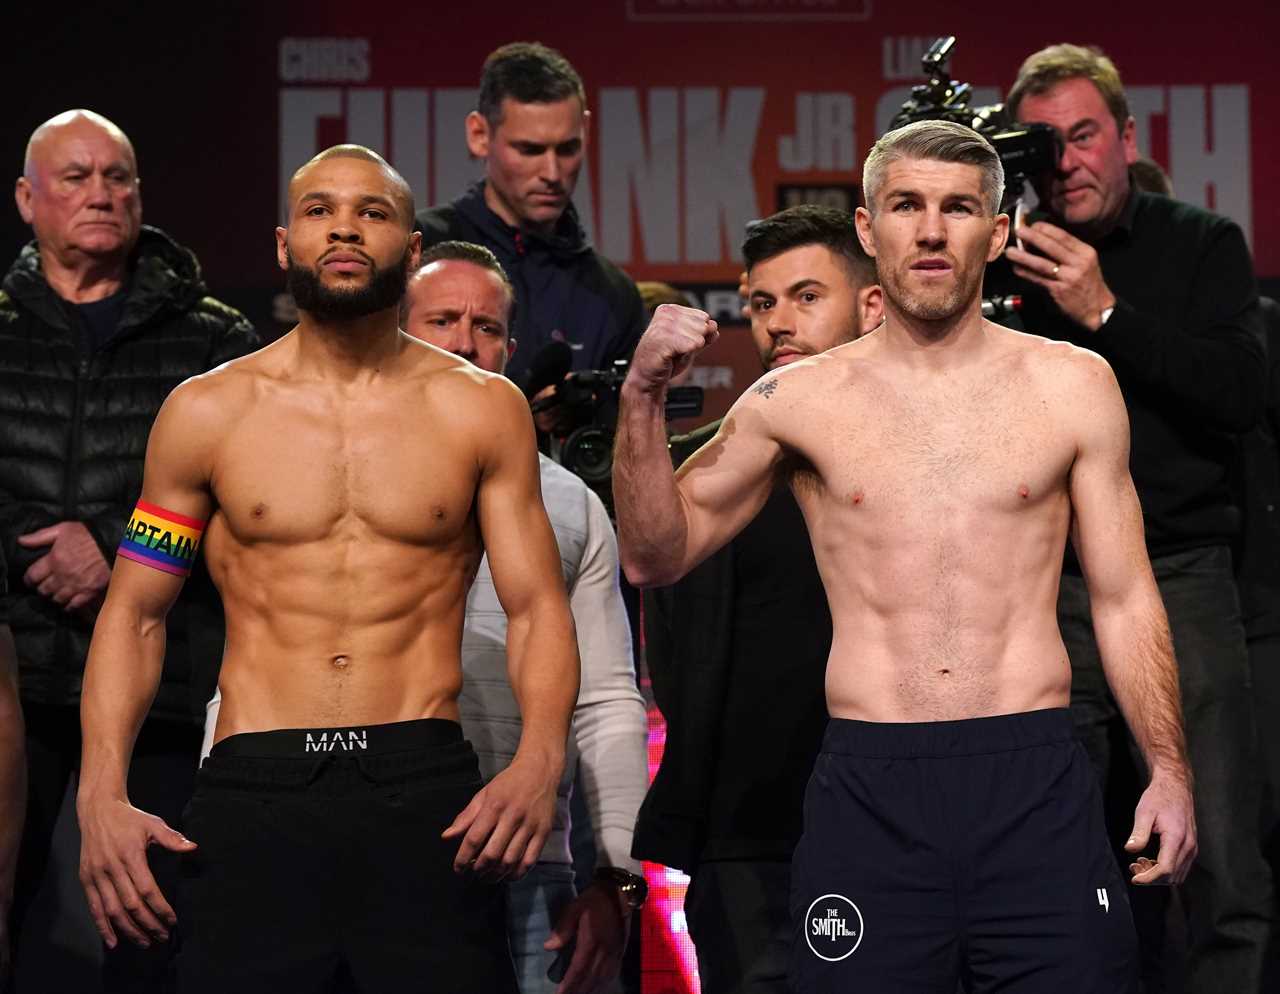 Chris Eubank Jr. vs Liam Smith live stream & TV guide - How to watch huge middleweight clashes